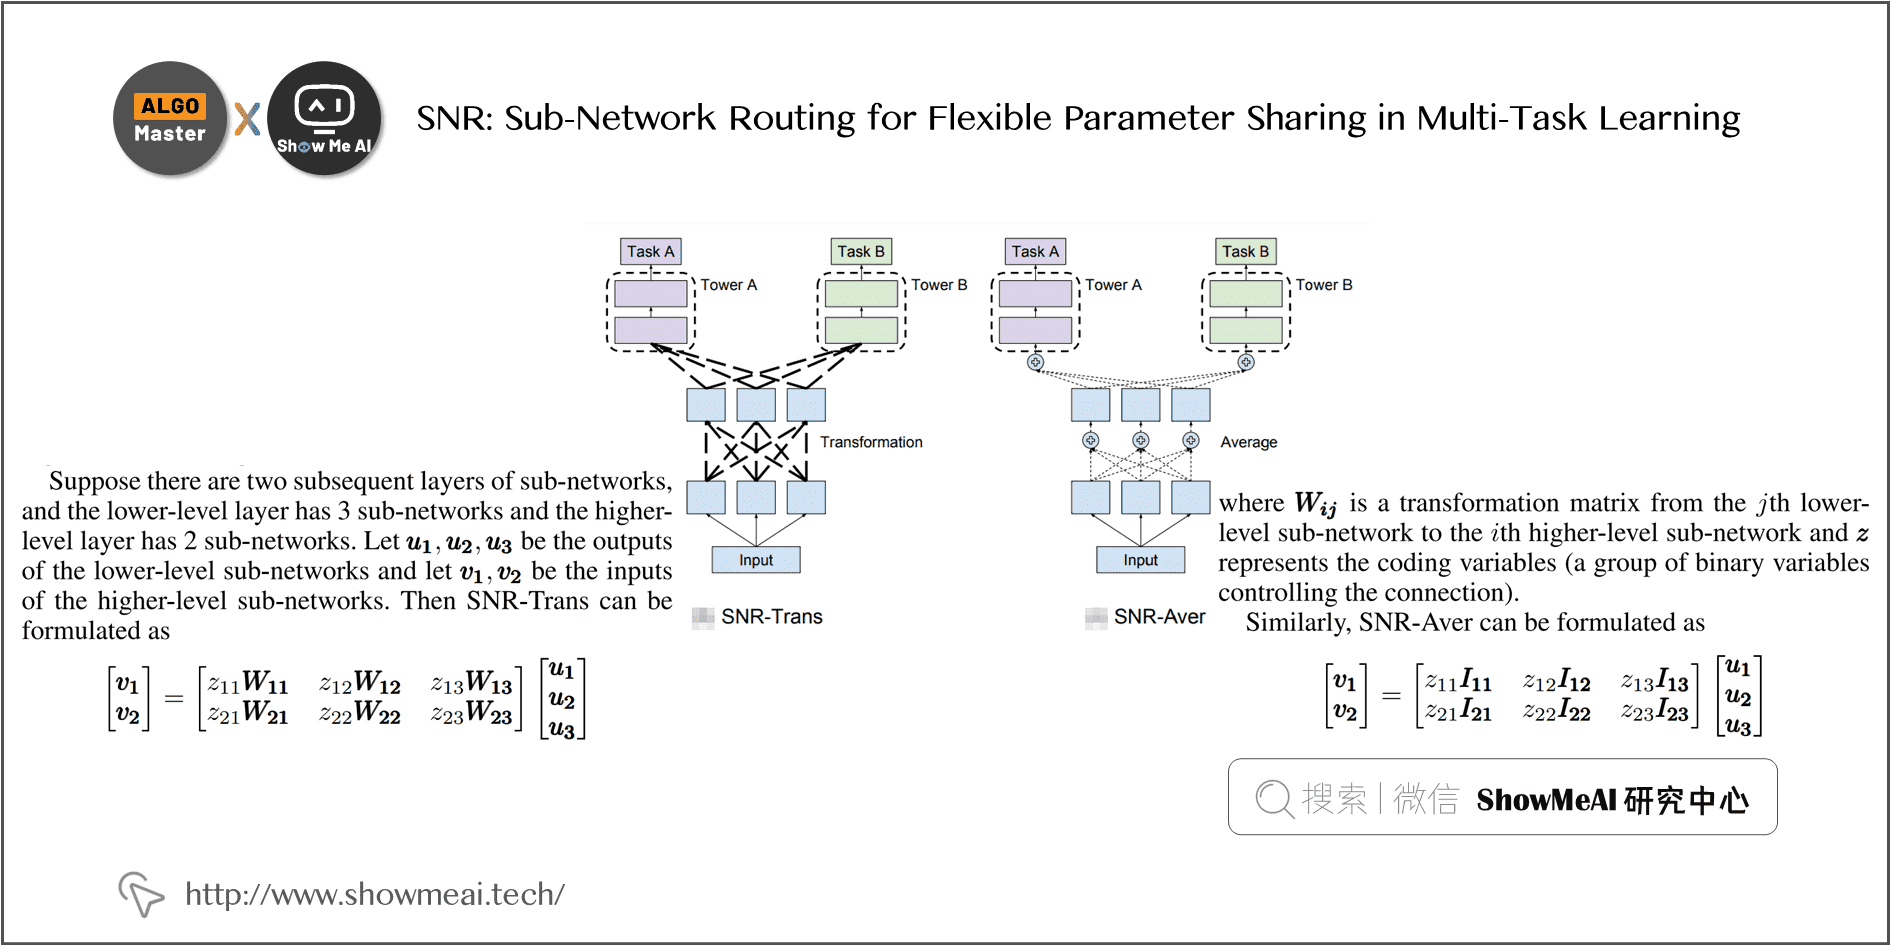 SNR: Sub-Network Routing for Flexible Parameter Sharing in Multi-Task Learning; 1-17